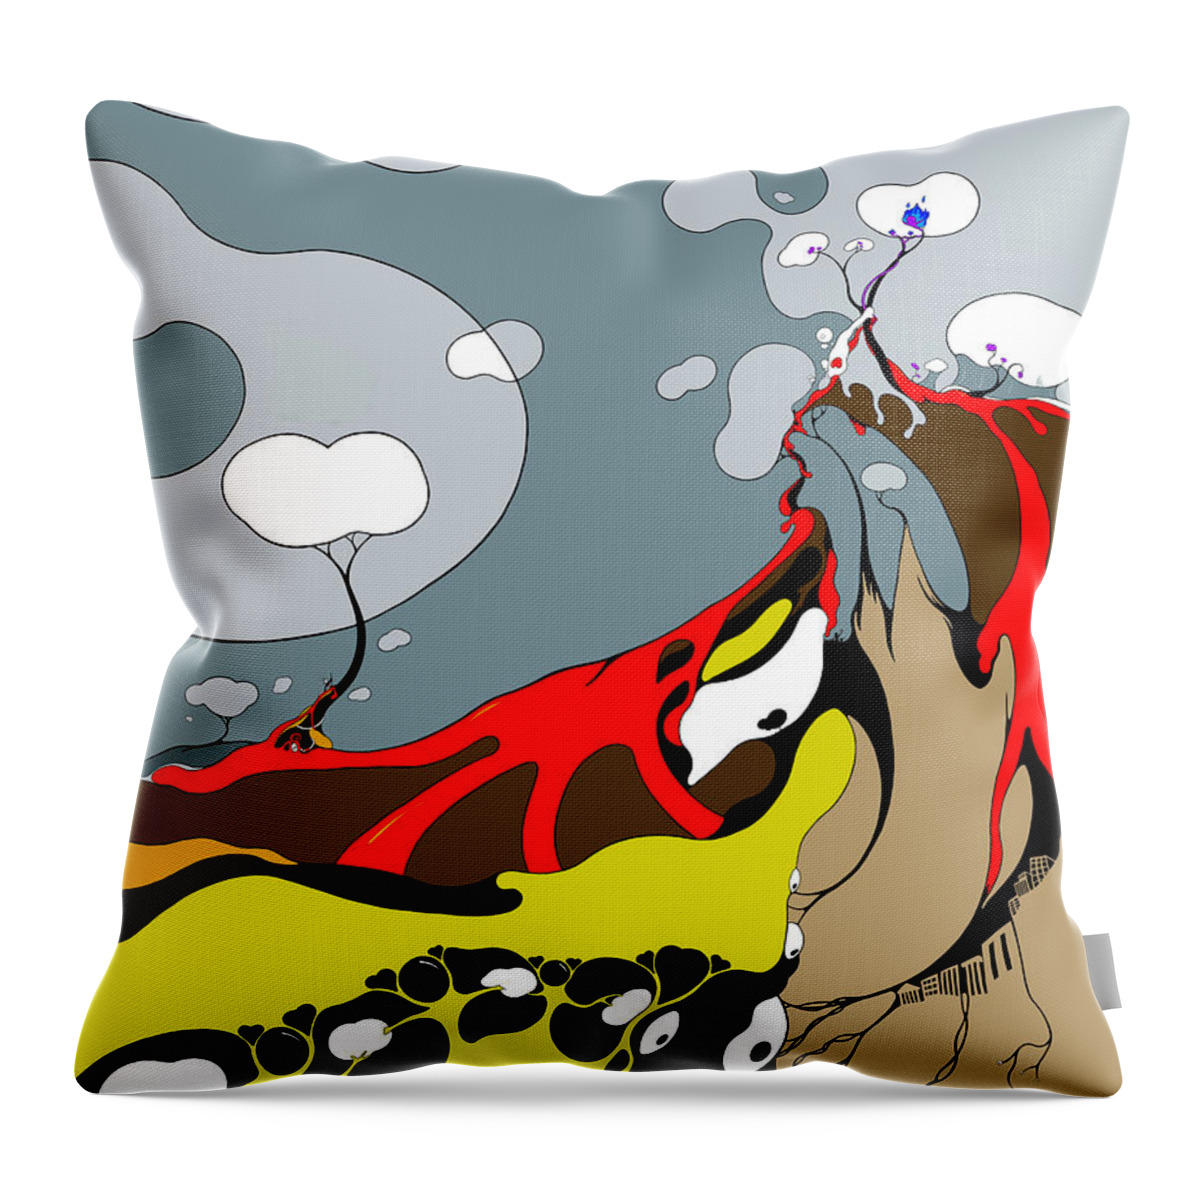 Climate Change Throw Pillow featuring the digital art Lit by Craig Tilley